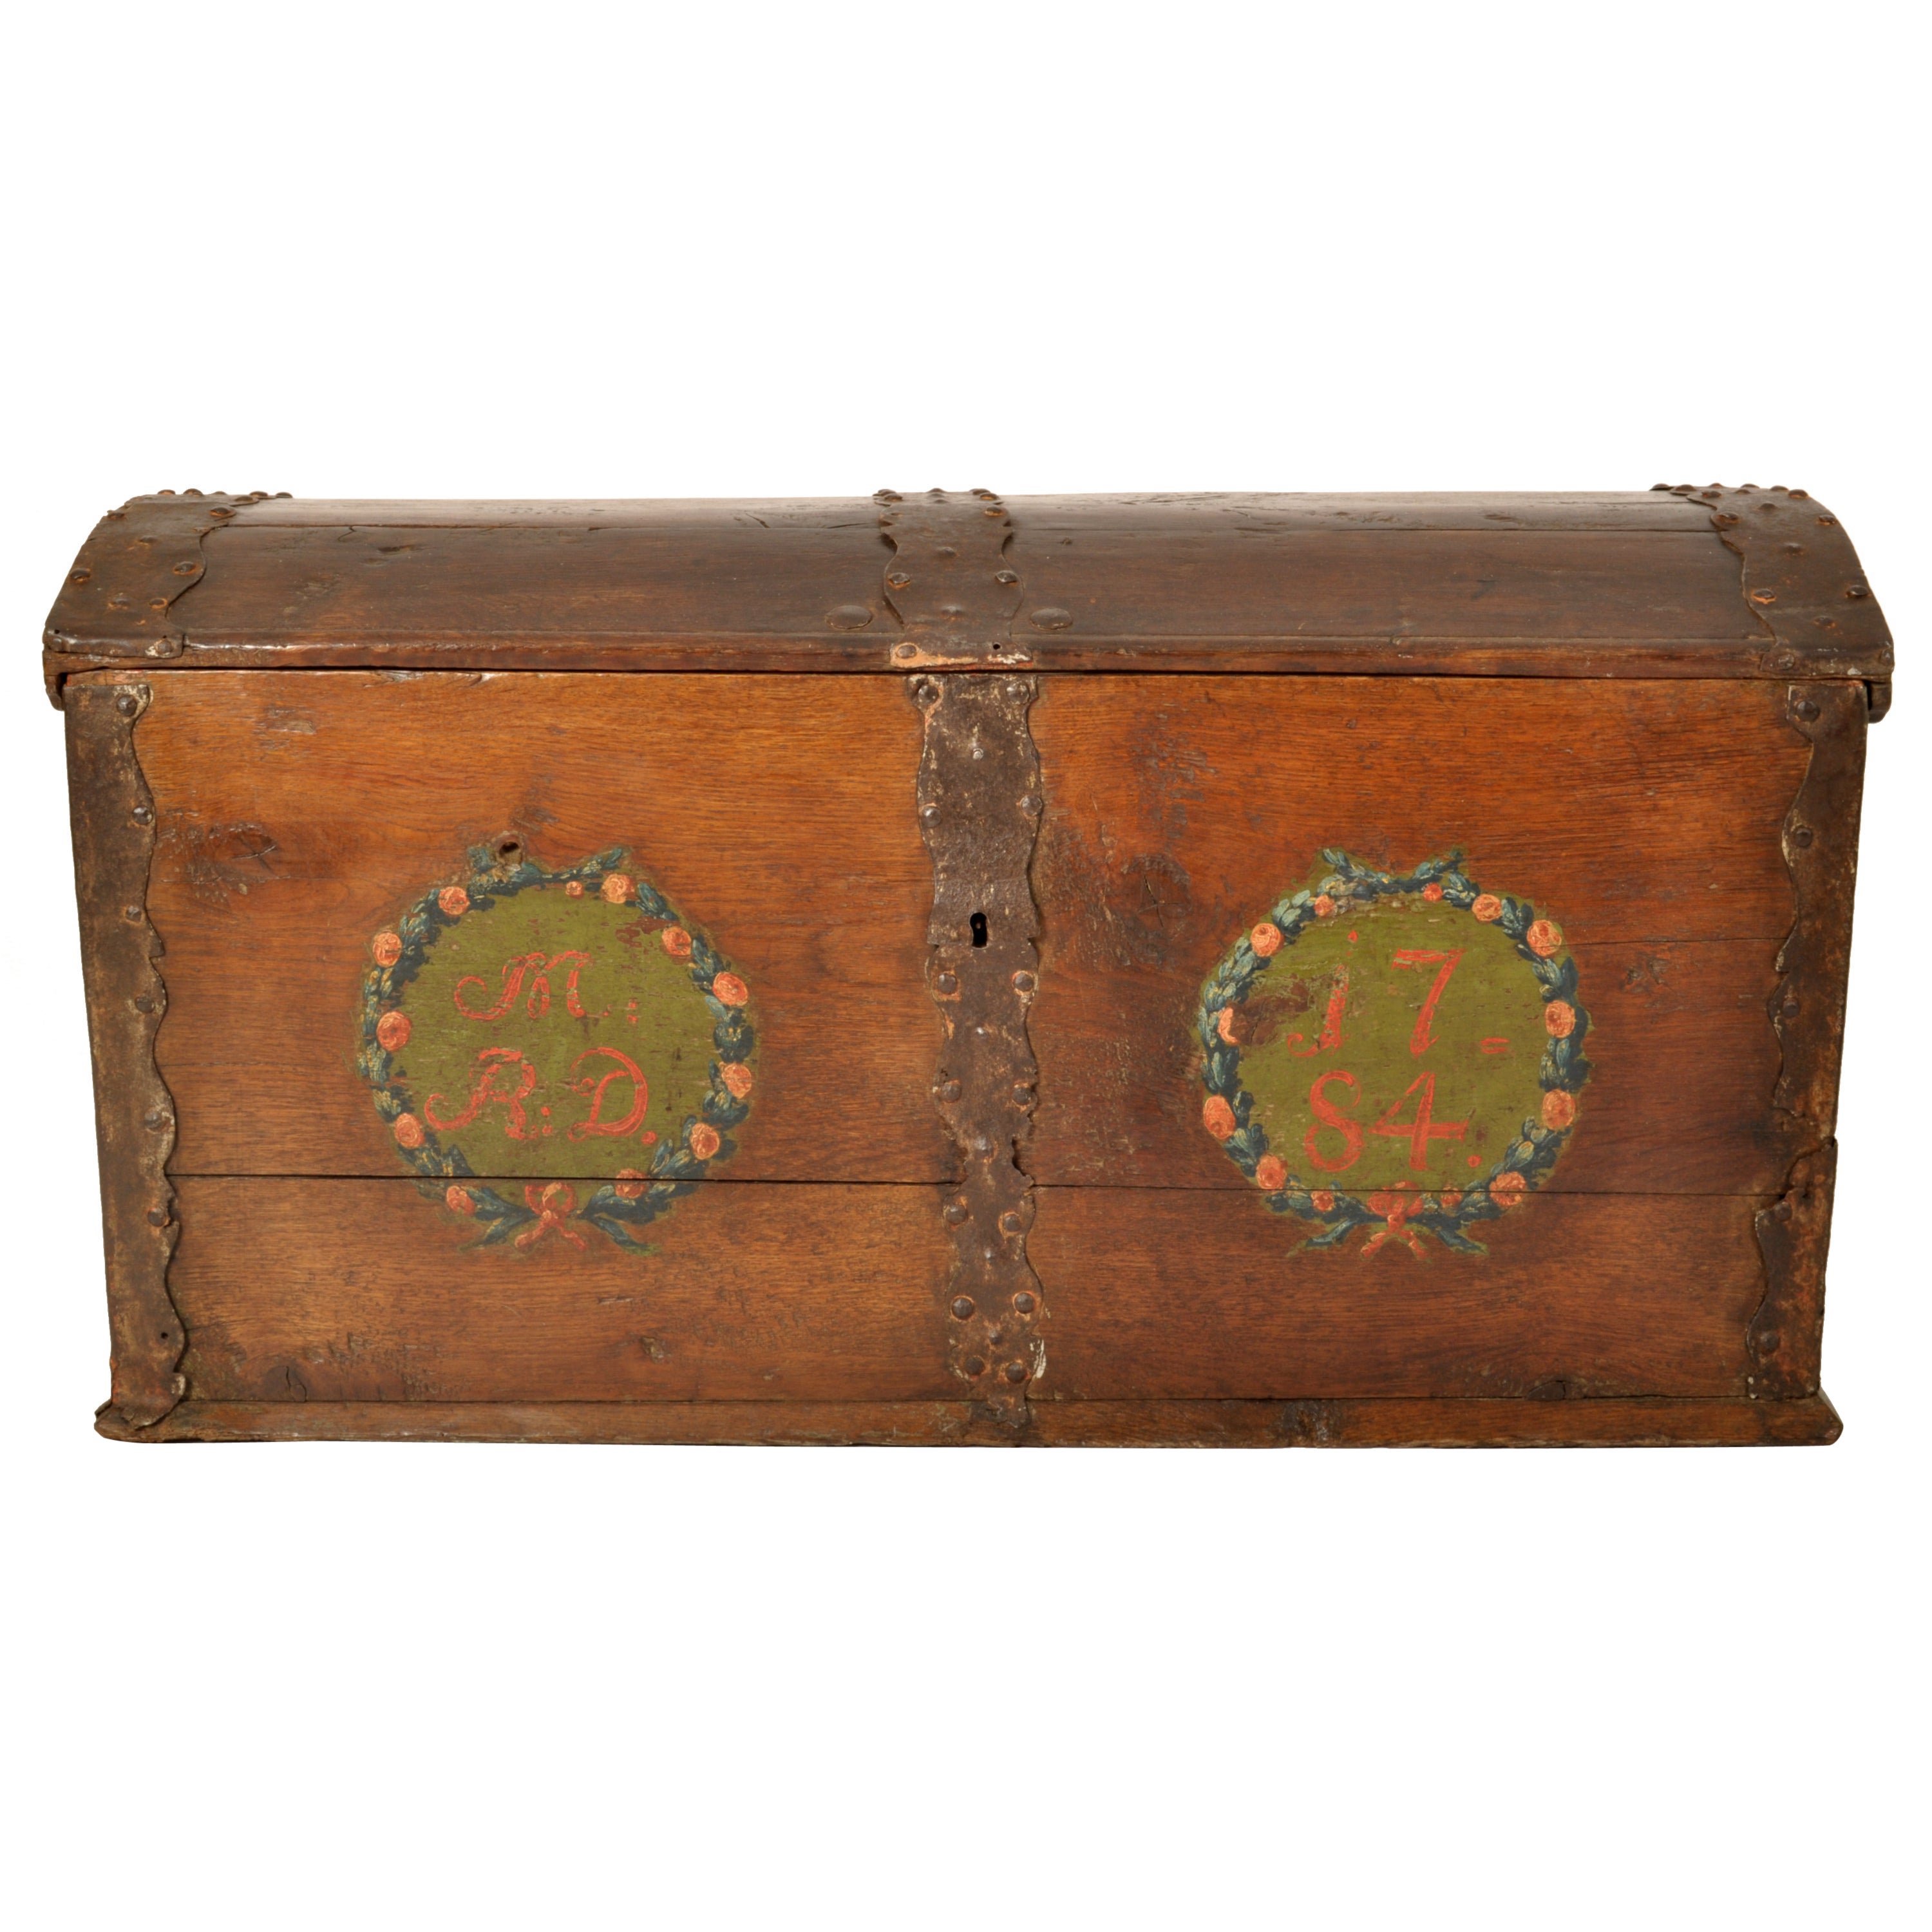 Antique 18th Century German Baroque Painted Walnut Iron Coffer Chest Trunk 1784 For Sale